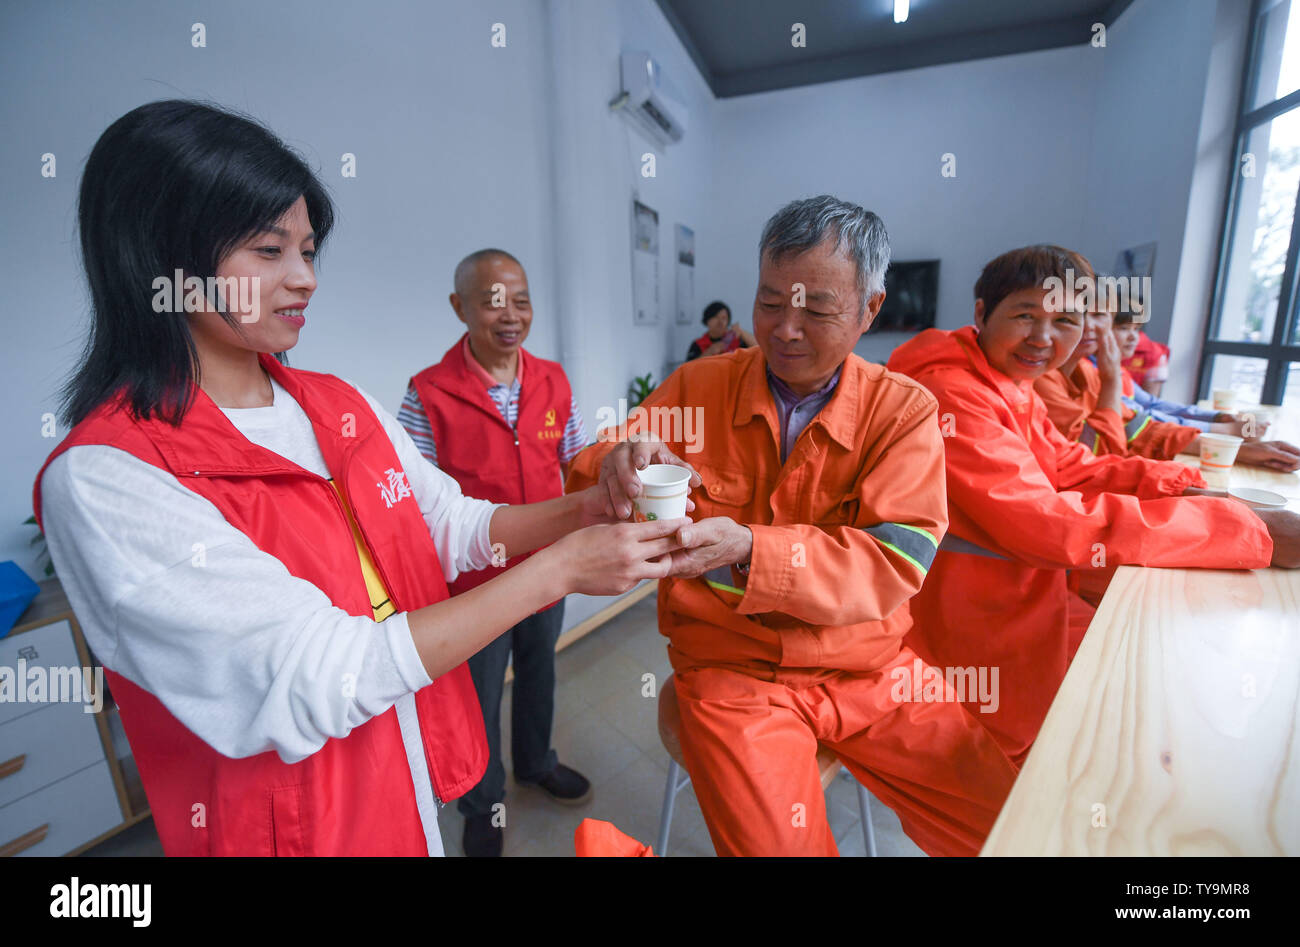 (190626) -- HUZHOU, June 26, 2019 (Xinhua) -- A volunteer offers a cup of water to an outdoor worker in Wuxing District in Huzhou, east China's Zhejiang Province, June 26, 2019. More than 50 public lounges have been put into use in Wuxing District, where weary outdoor workers and common citizens can drink water, rest, charge their phones as well as escape the searing sun. (Xinhua/Xu Yu) Stock Photo